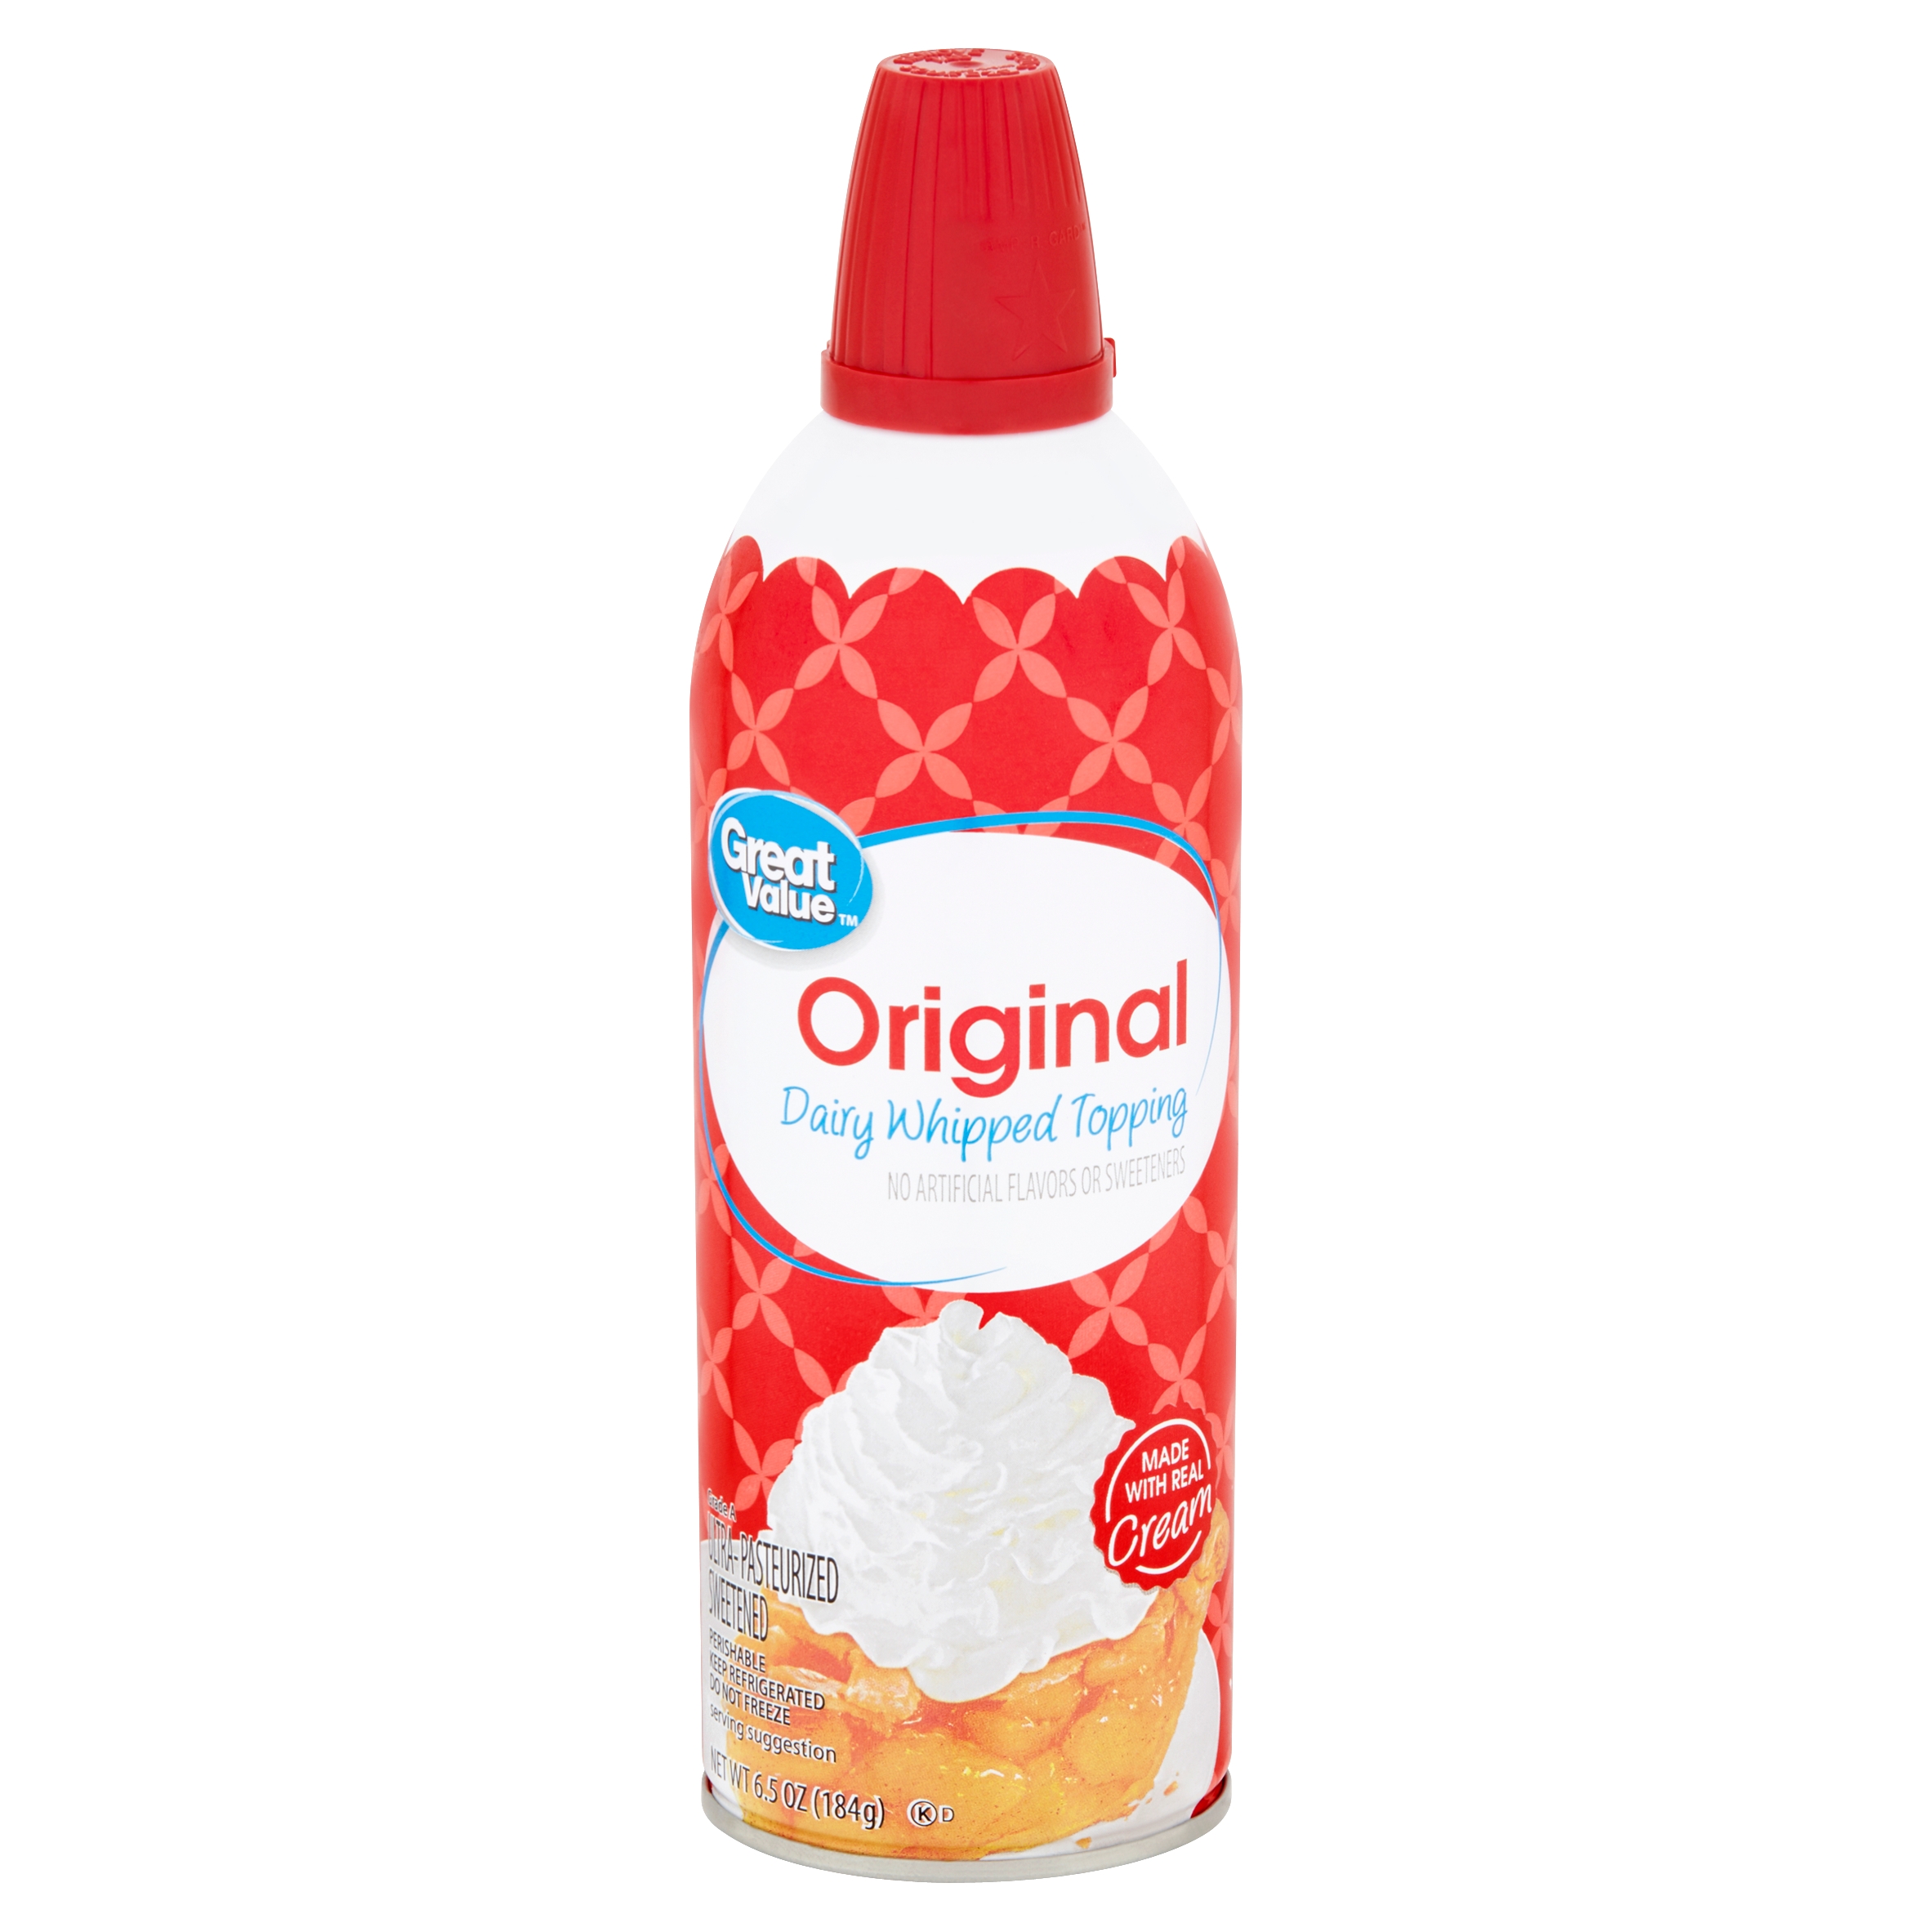 Great Value Original Dairy Whipped Topping, 6.5 Oz Image